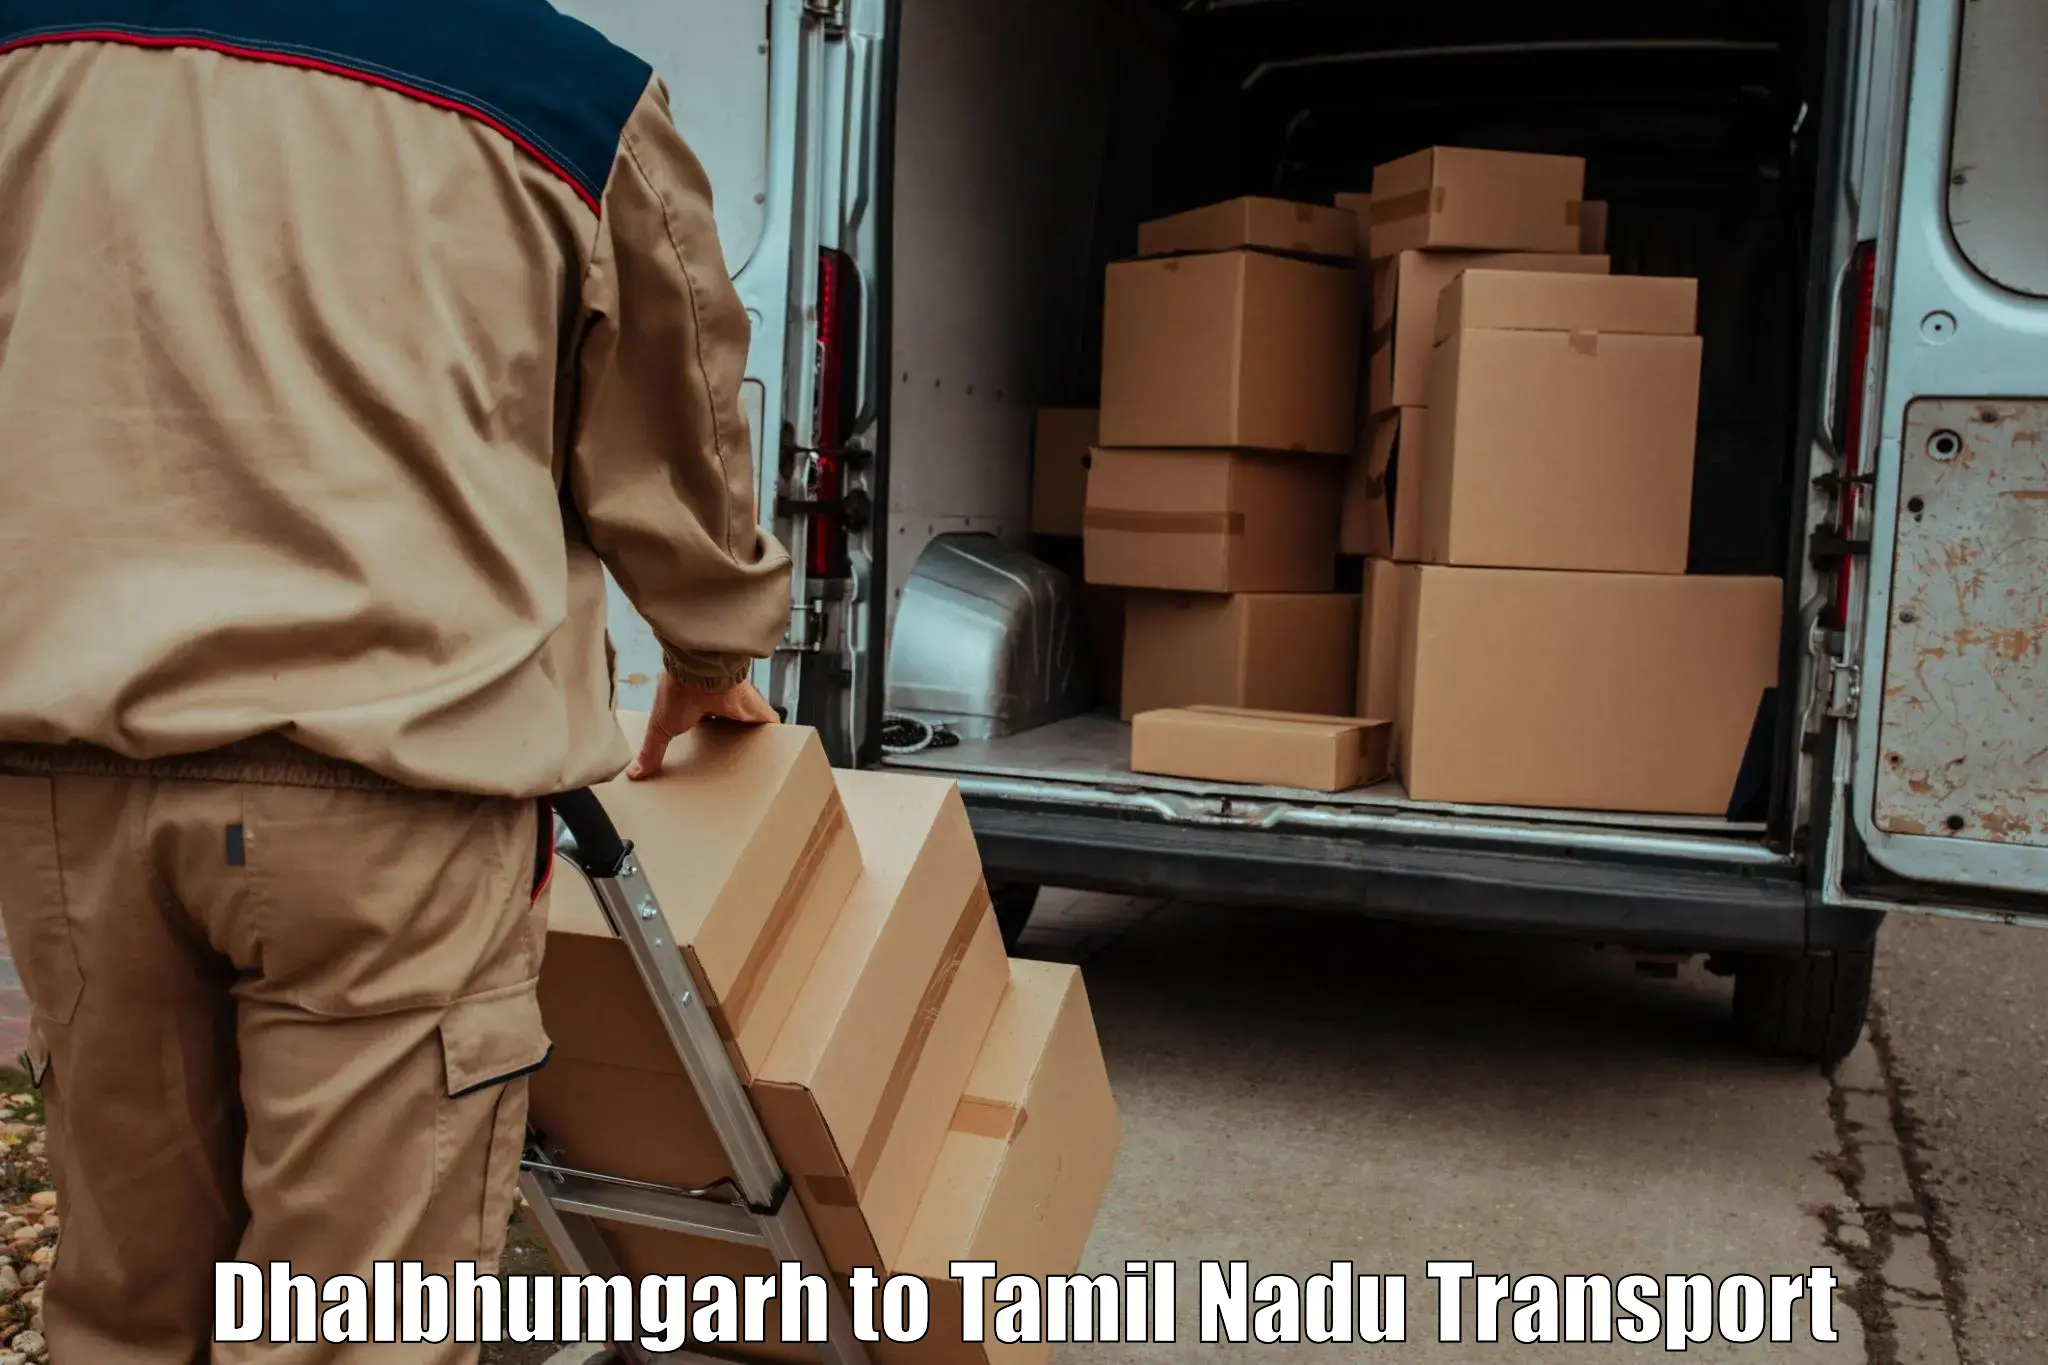 Luggage transport services Dhalbhumgarh to Tiruppur